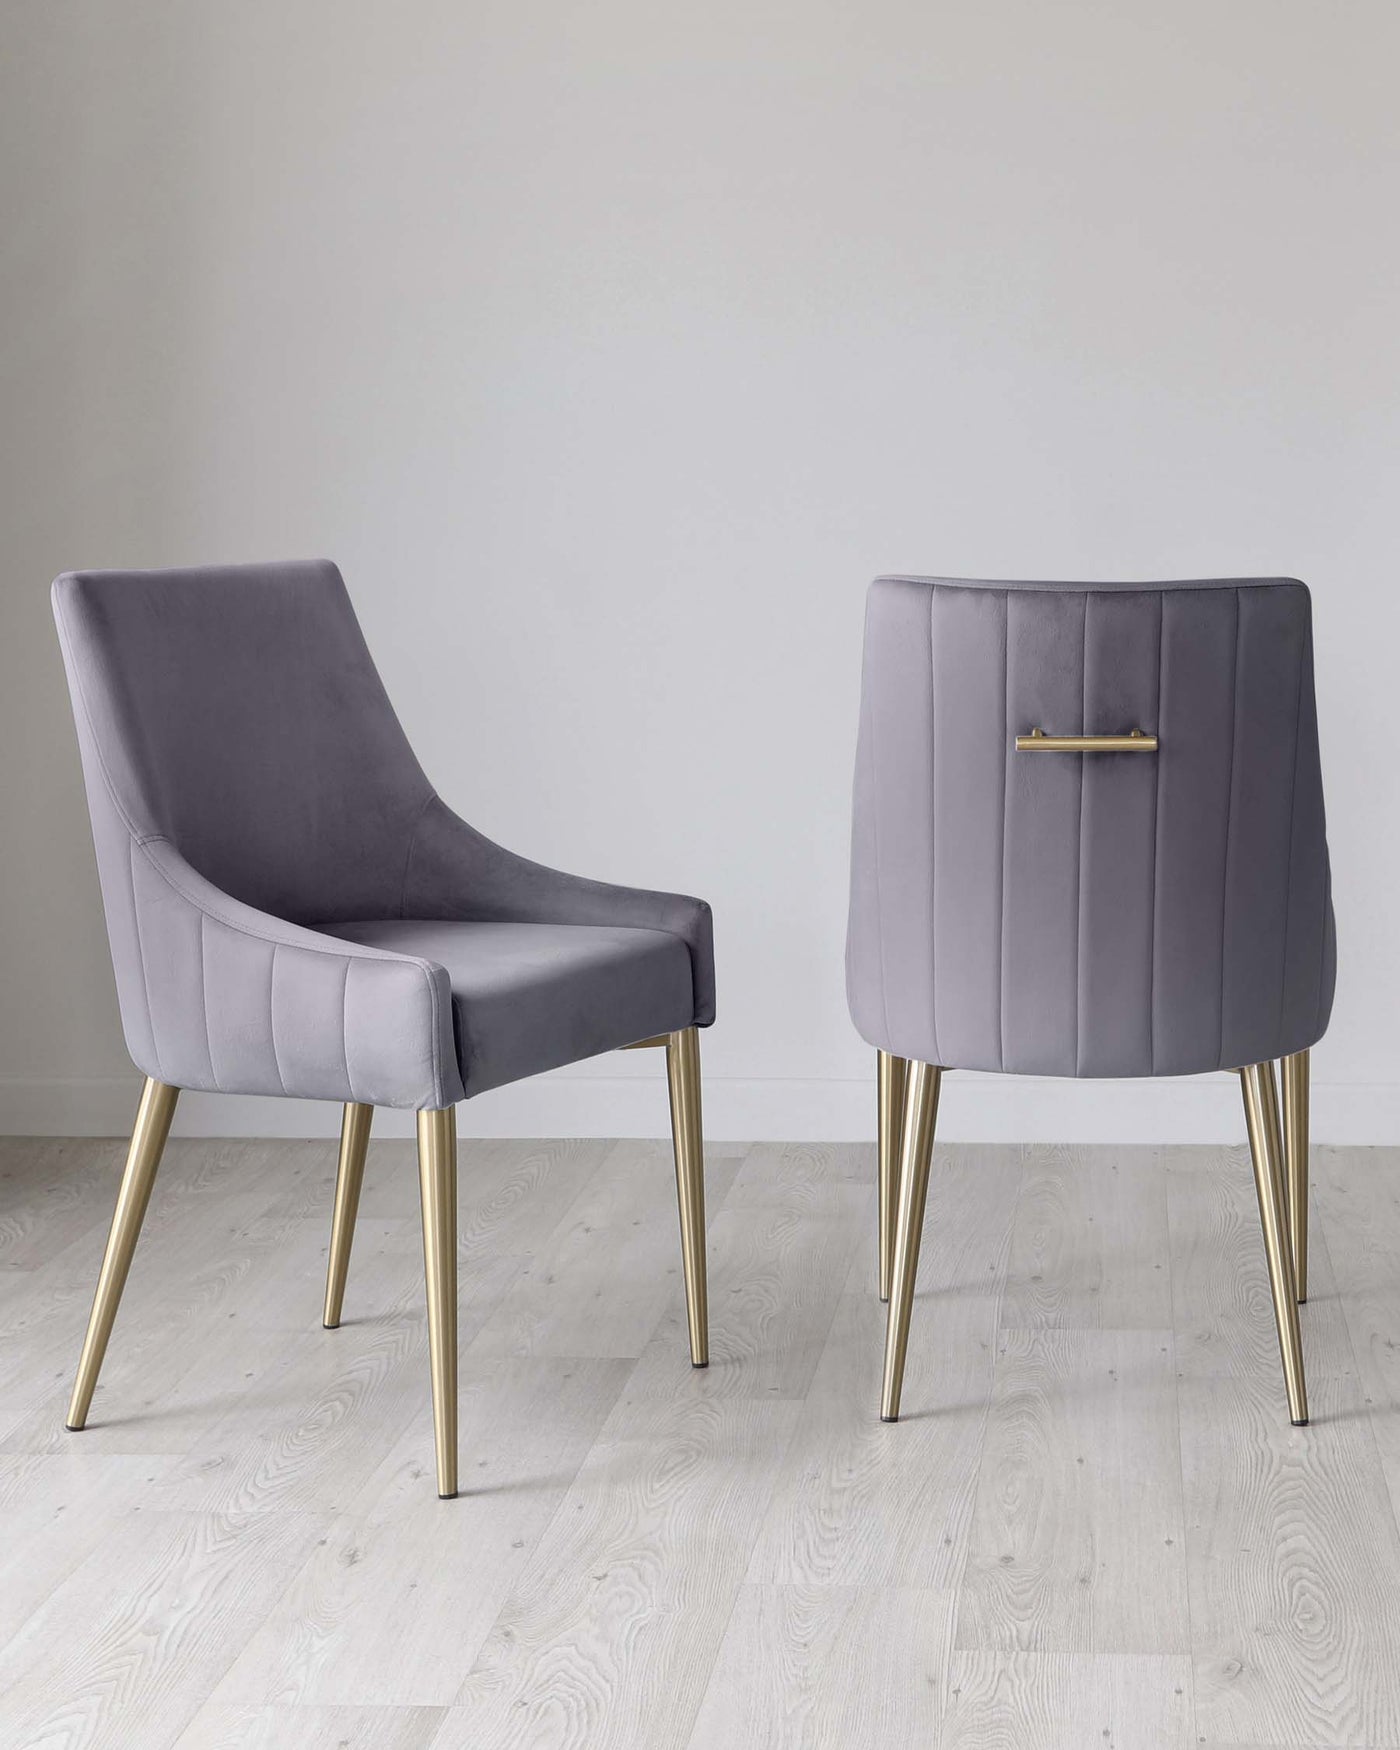 Two elegant modern dining chairs with a luxurious grey fabric upholstery and tapered gold metal legs. The chair on the left features a high back with a slight wingback design and no armrests, while the chair on the right has a lower back with vertical stitching details and an accent handle on the top. Both chairs exude a contemporary sophistication suitable for a chic dining room setting.